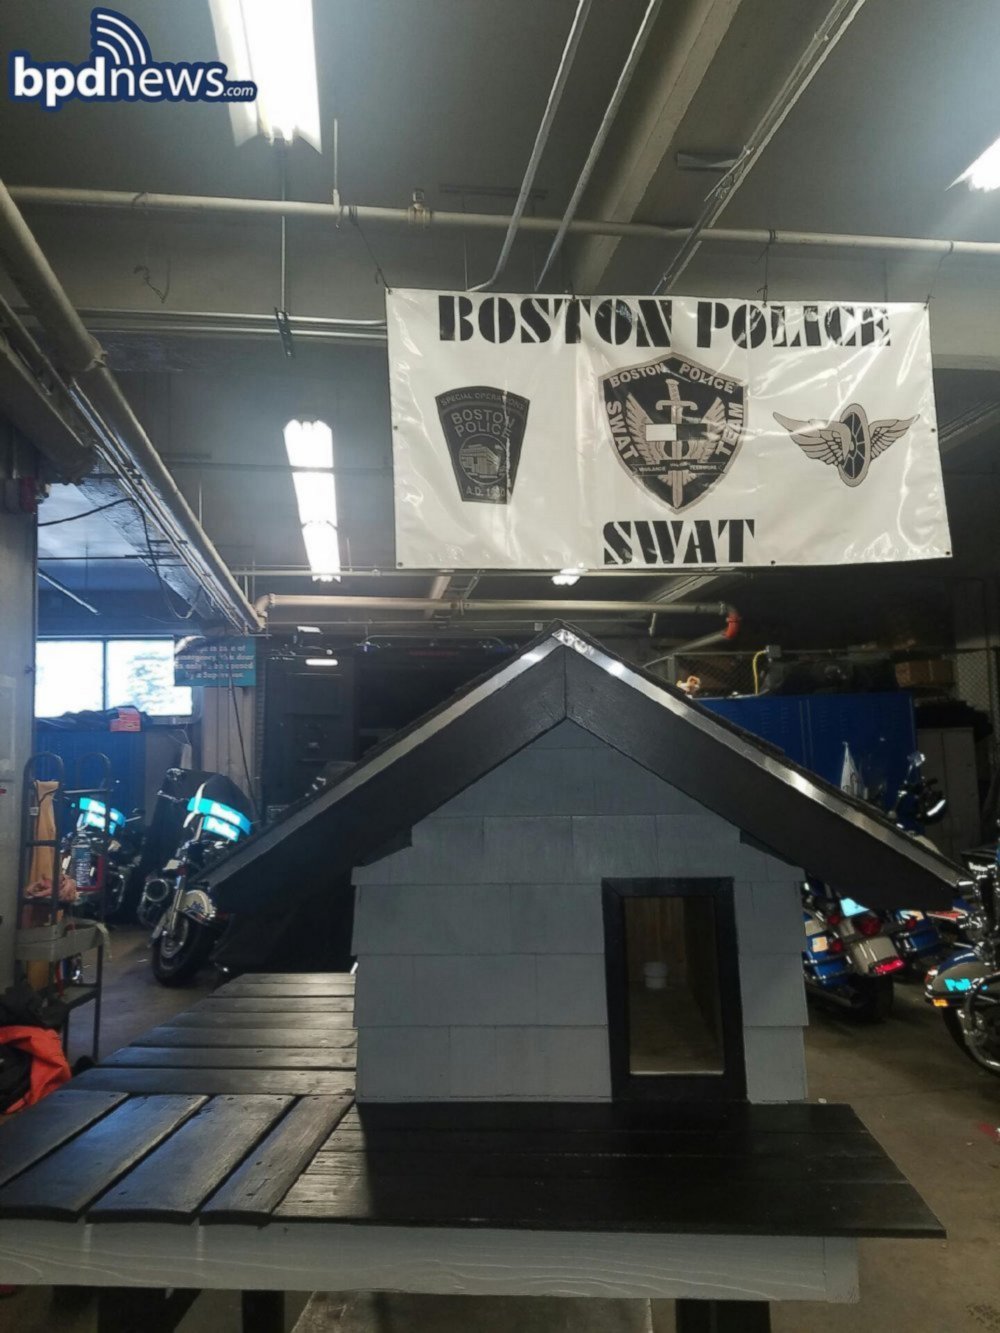 PHOTO: Boston Police Department built a kitty condo for a stray Calico cat, dubbed "SWAT cat" that they've been caring for since 2013.